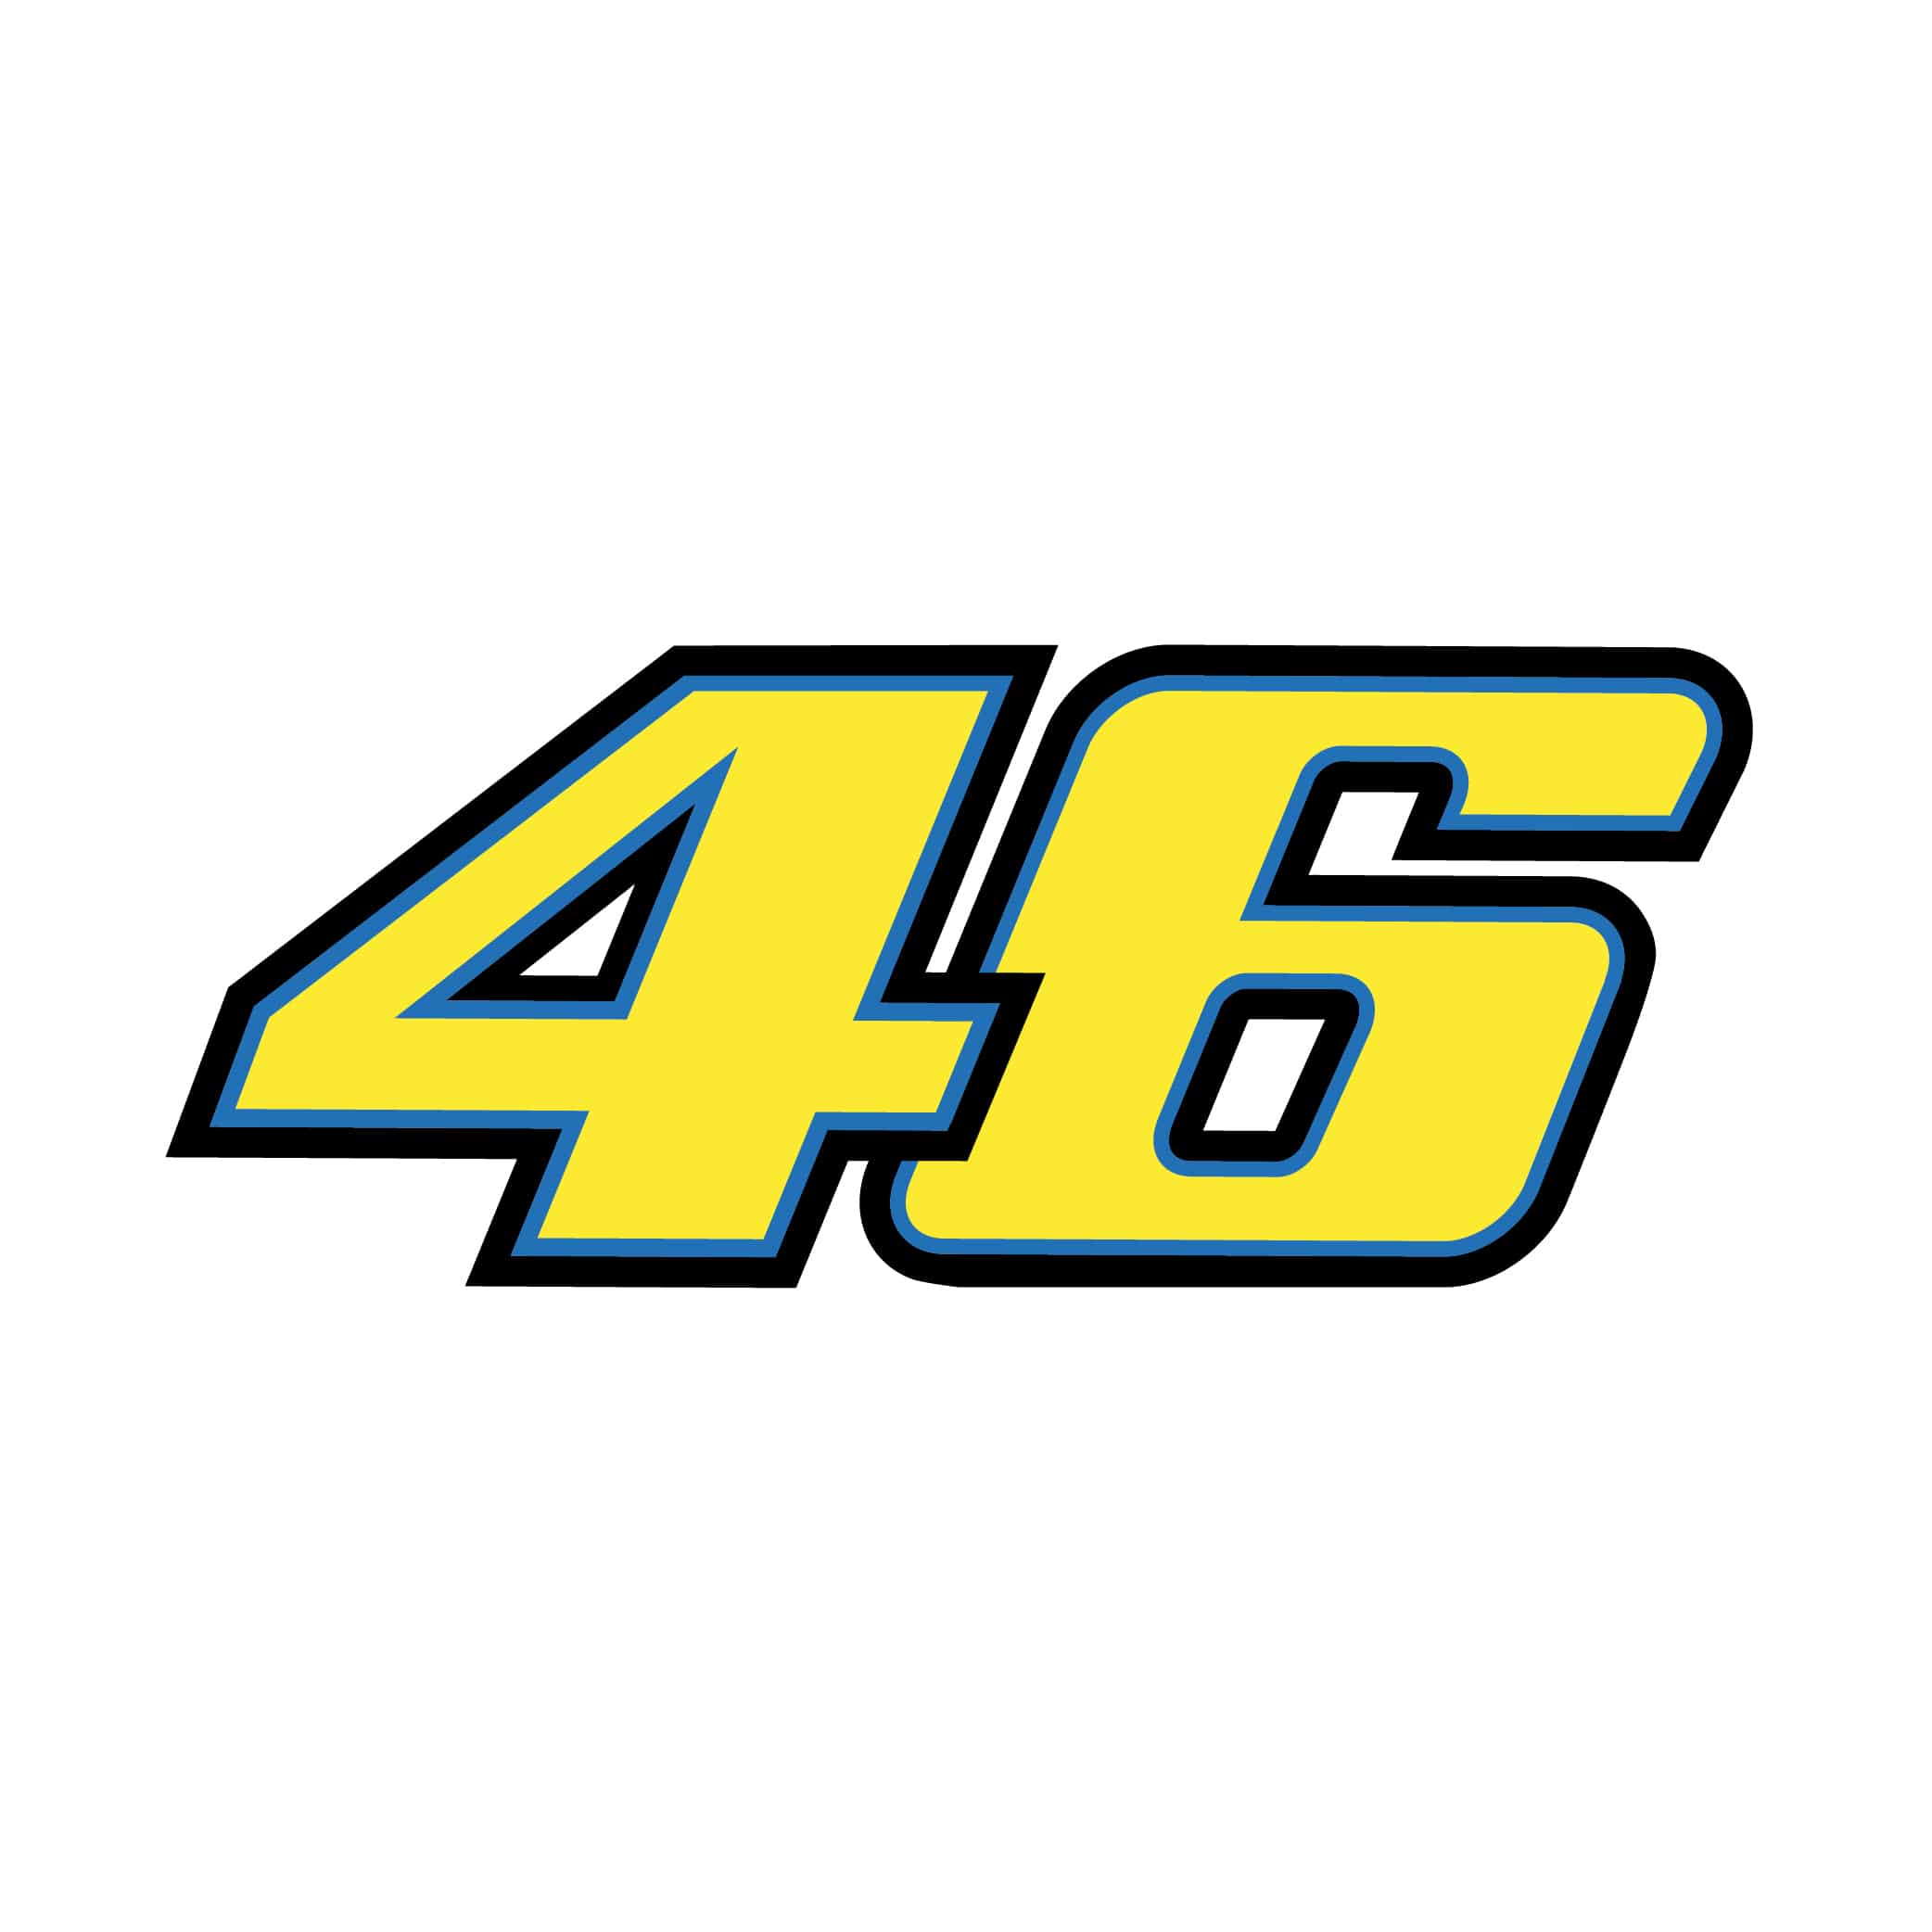 Valentino Rossi The Doctor Font - clevergin